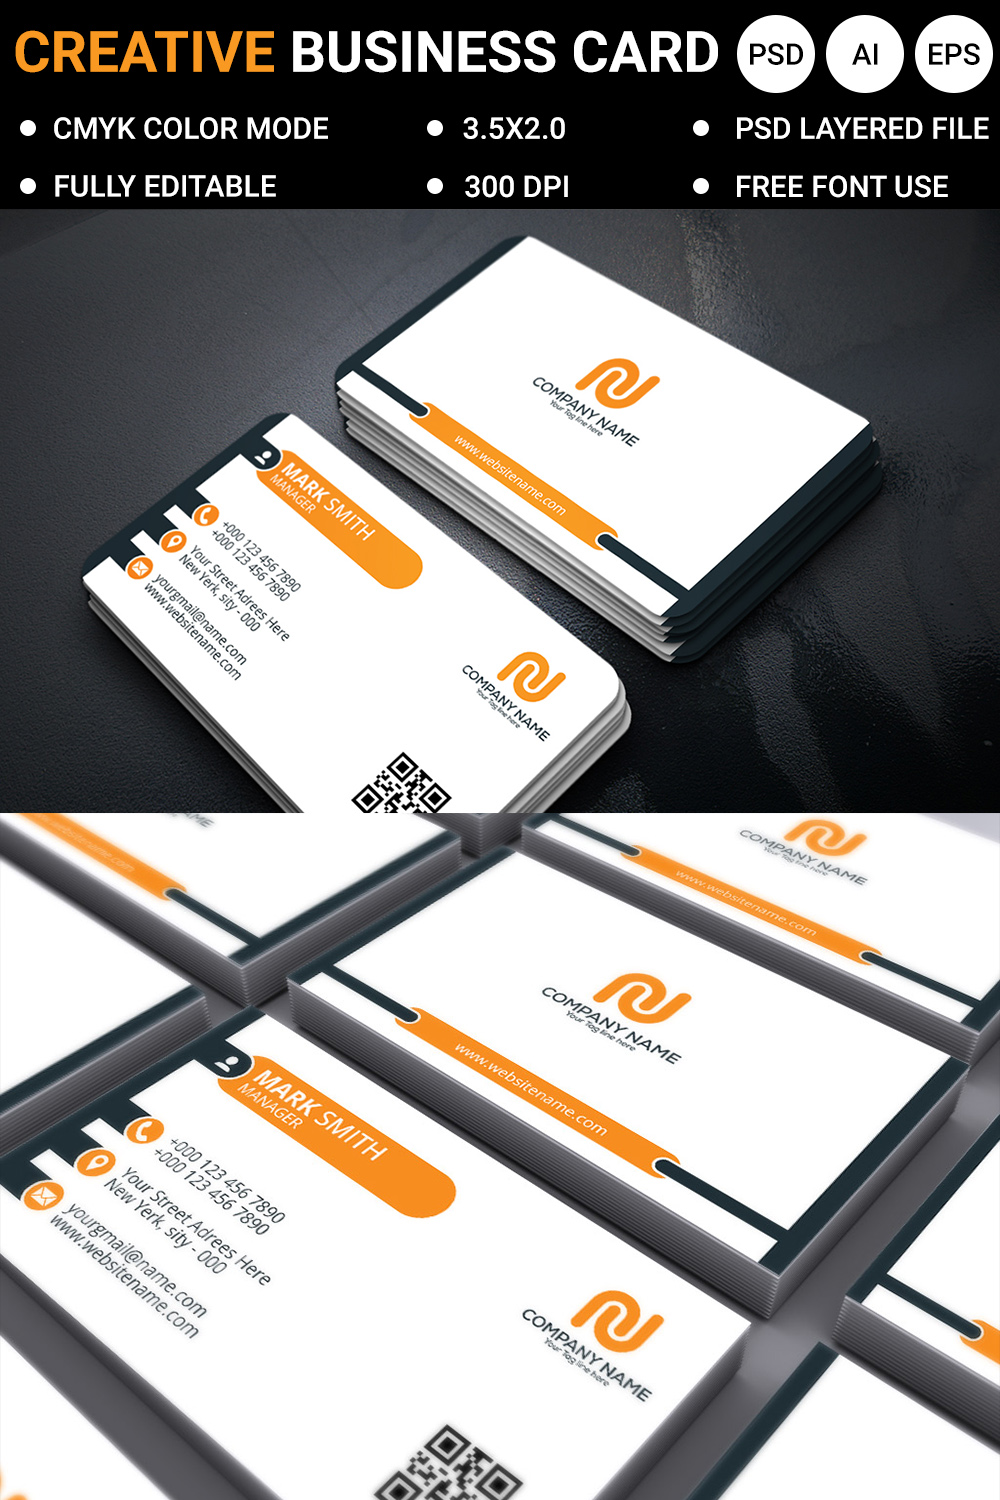 Modern and creative business card design template psd file, eps file, ai file pinterest preview image.